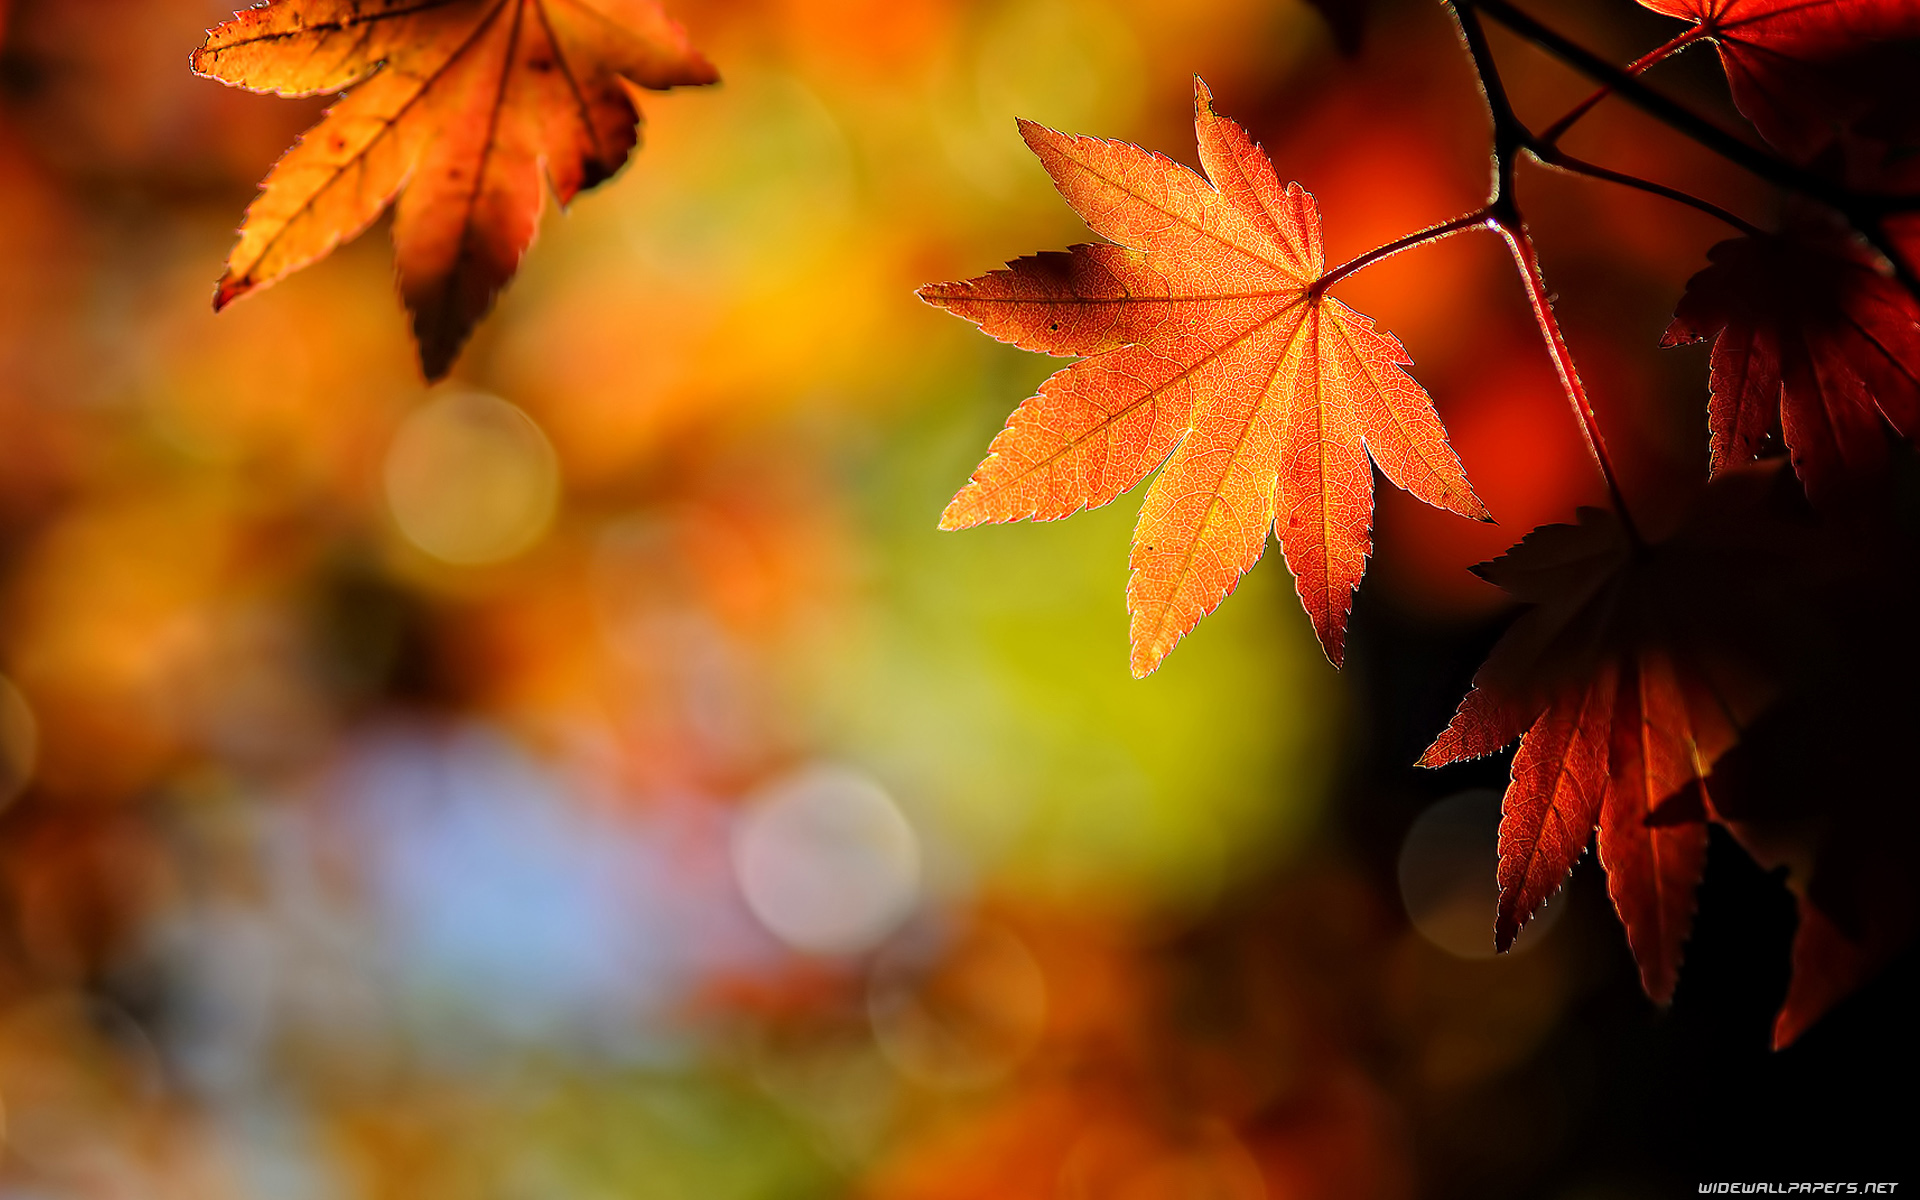 Autumn Leaves Wallpaper wallpapers55com   Best Wallpapers for PCs 1920x1200